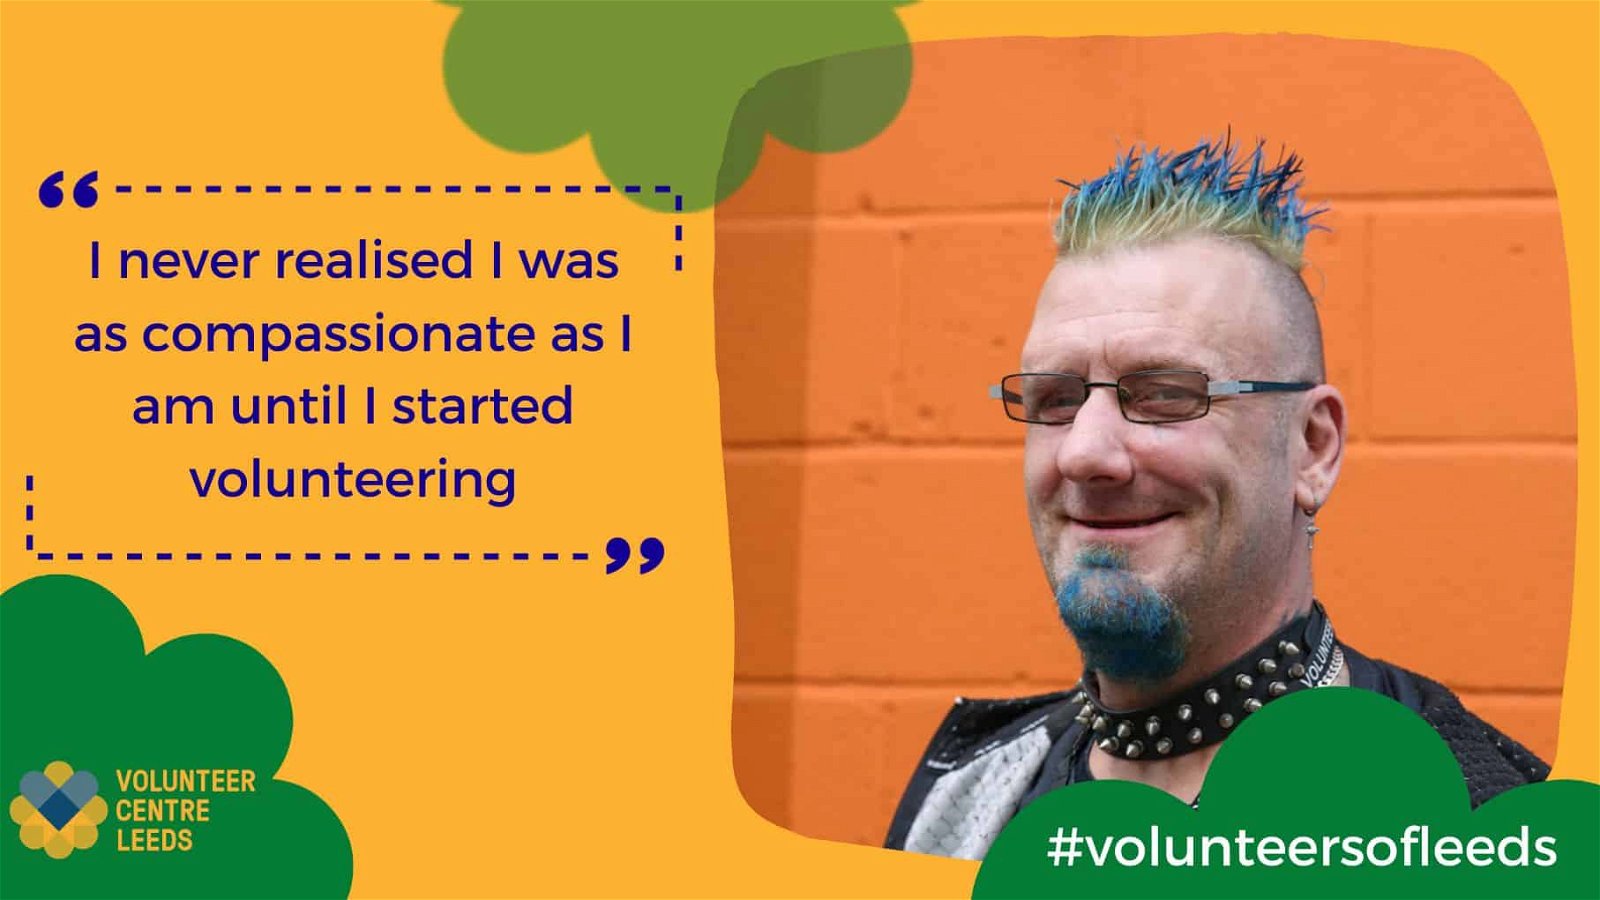 A man with blue hair stands in front of an orange wall. His name is Leroy and he volunteers for Battle Scars